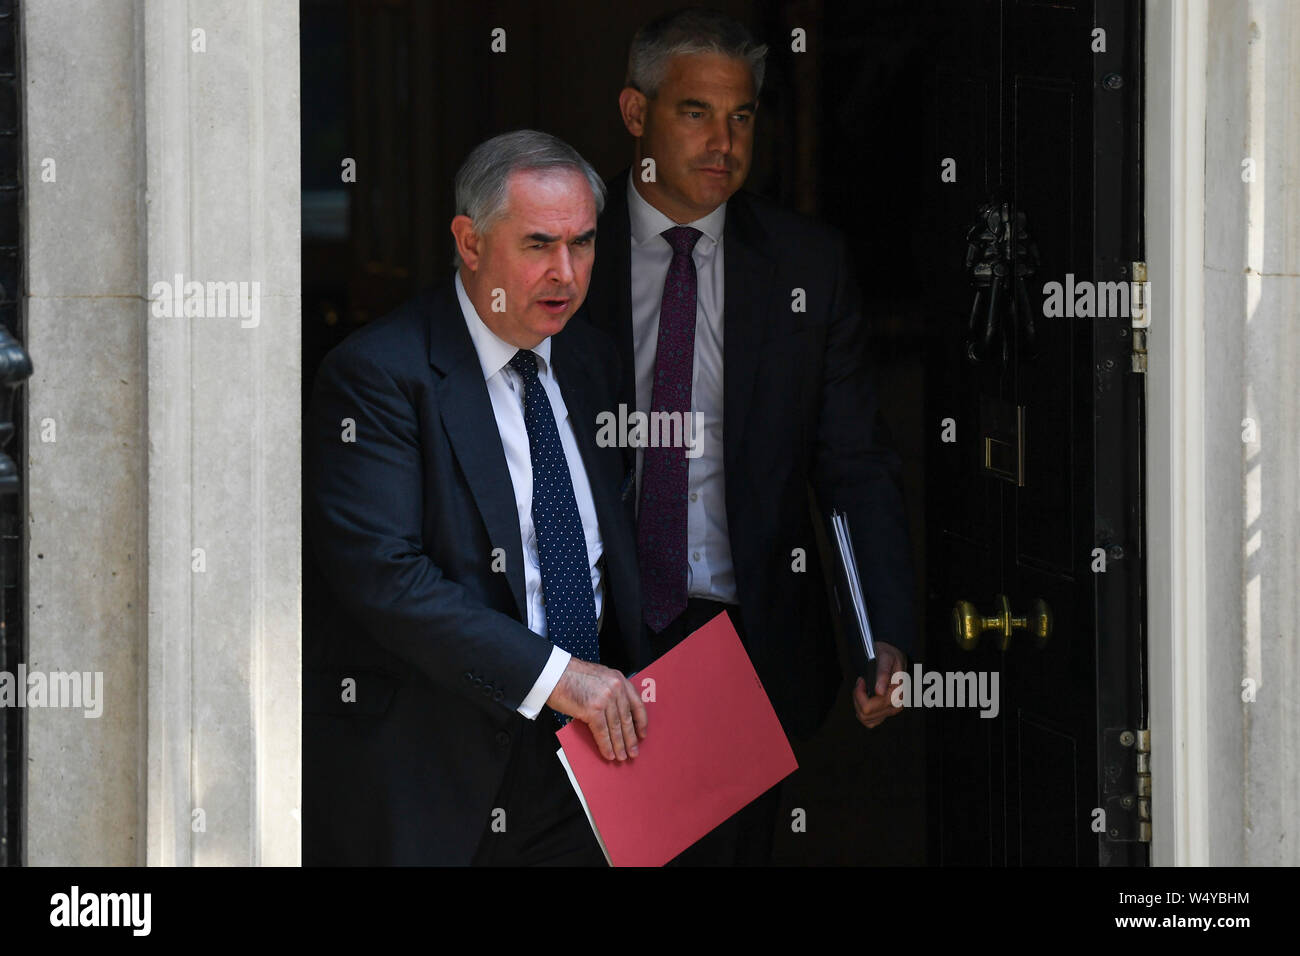 (190725) -- LONDON, July 25, 2019 (Xinhua) -- Britain's Attorney General Geoffrey Cox (L) and Brexit Secretary Stephen Barclay leave 10 Downing Street after attending a cabinet meeting in London, Britain, on July 25, 2019. (Photo by Alberto Pezzali/Xinhua) Stock Photo